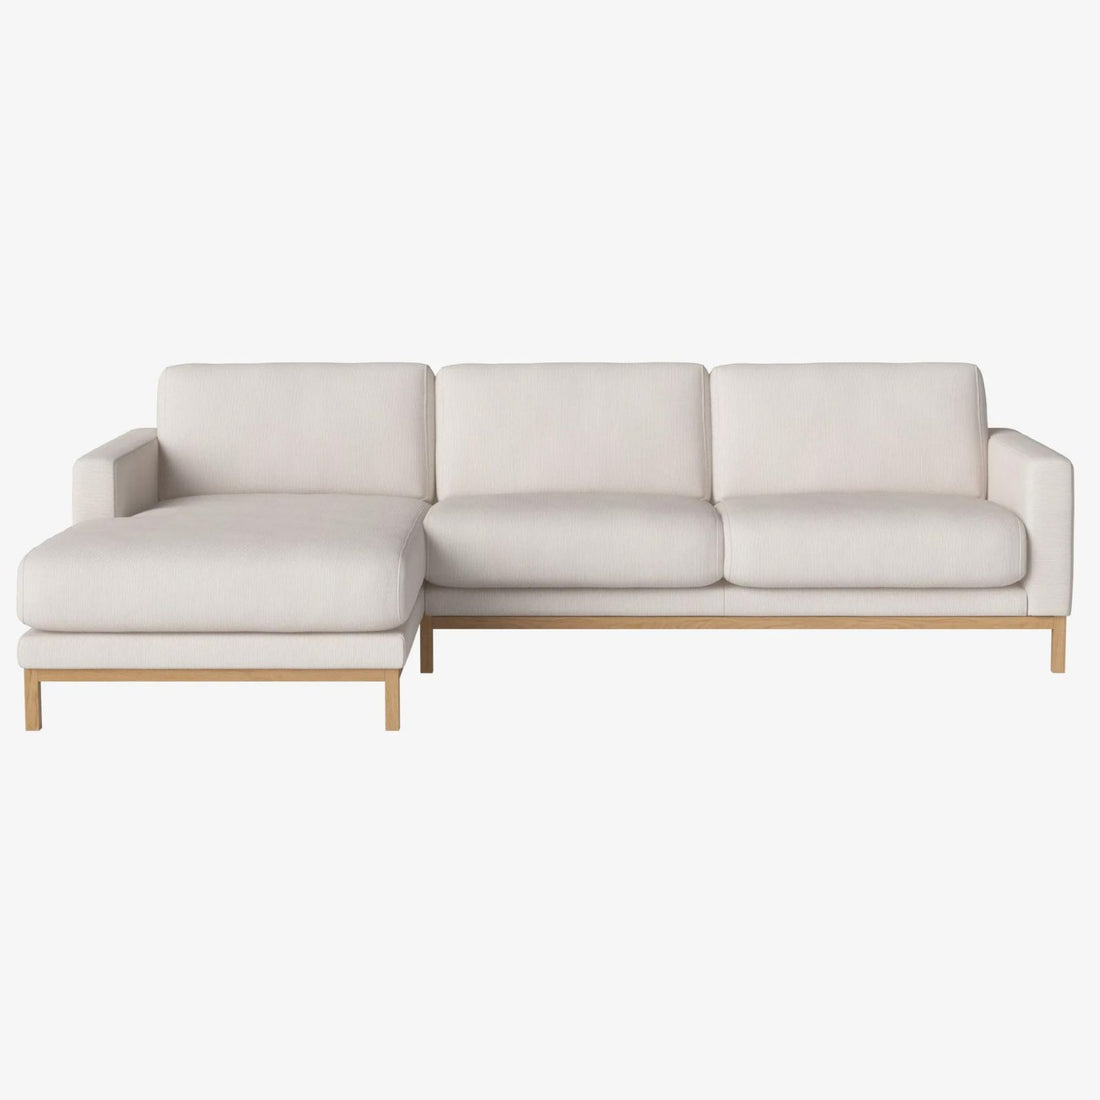 North | Sofa 3 Seater with chaise longue left